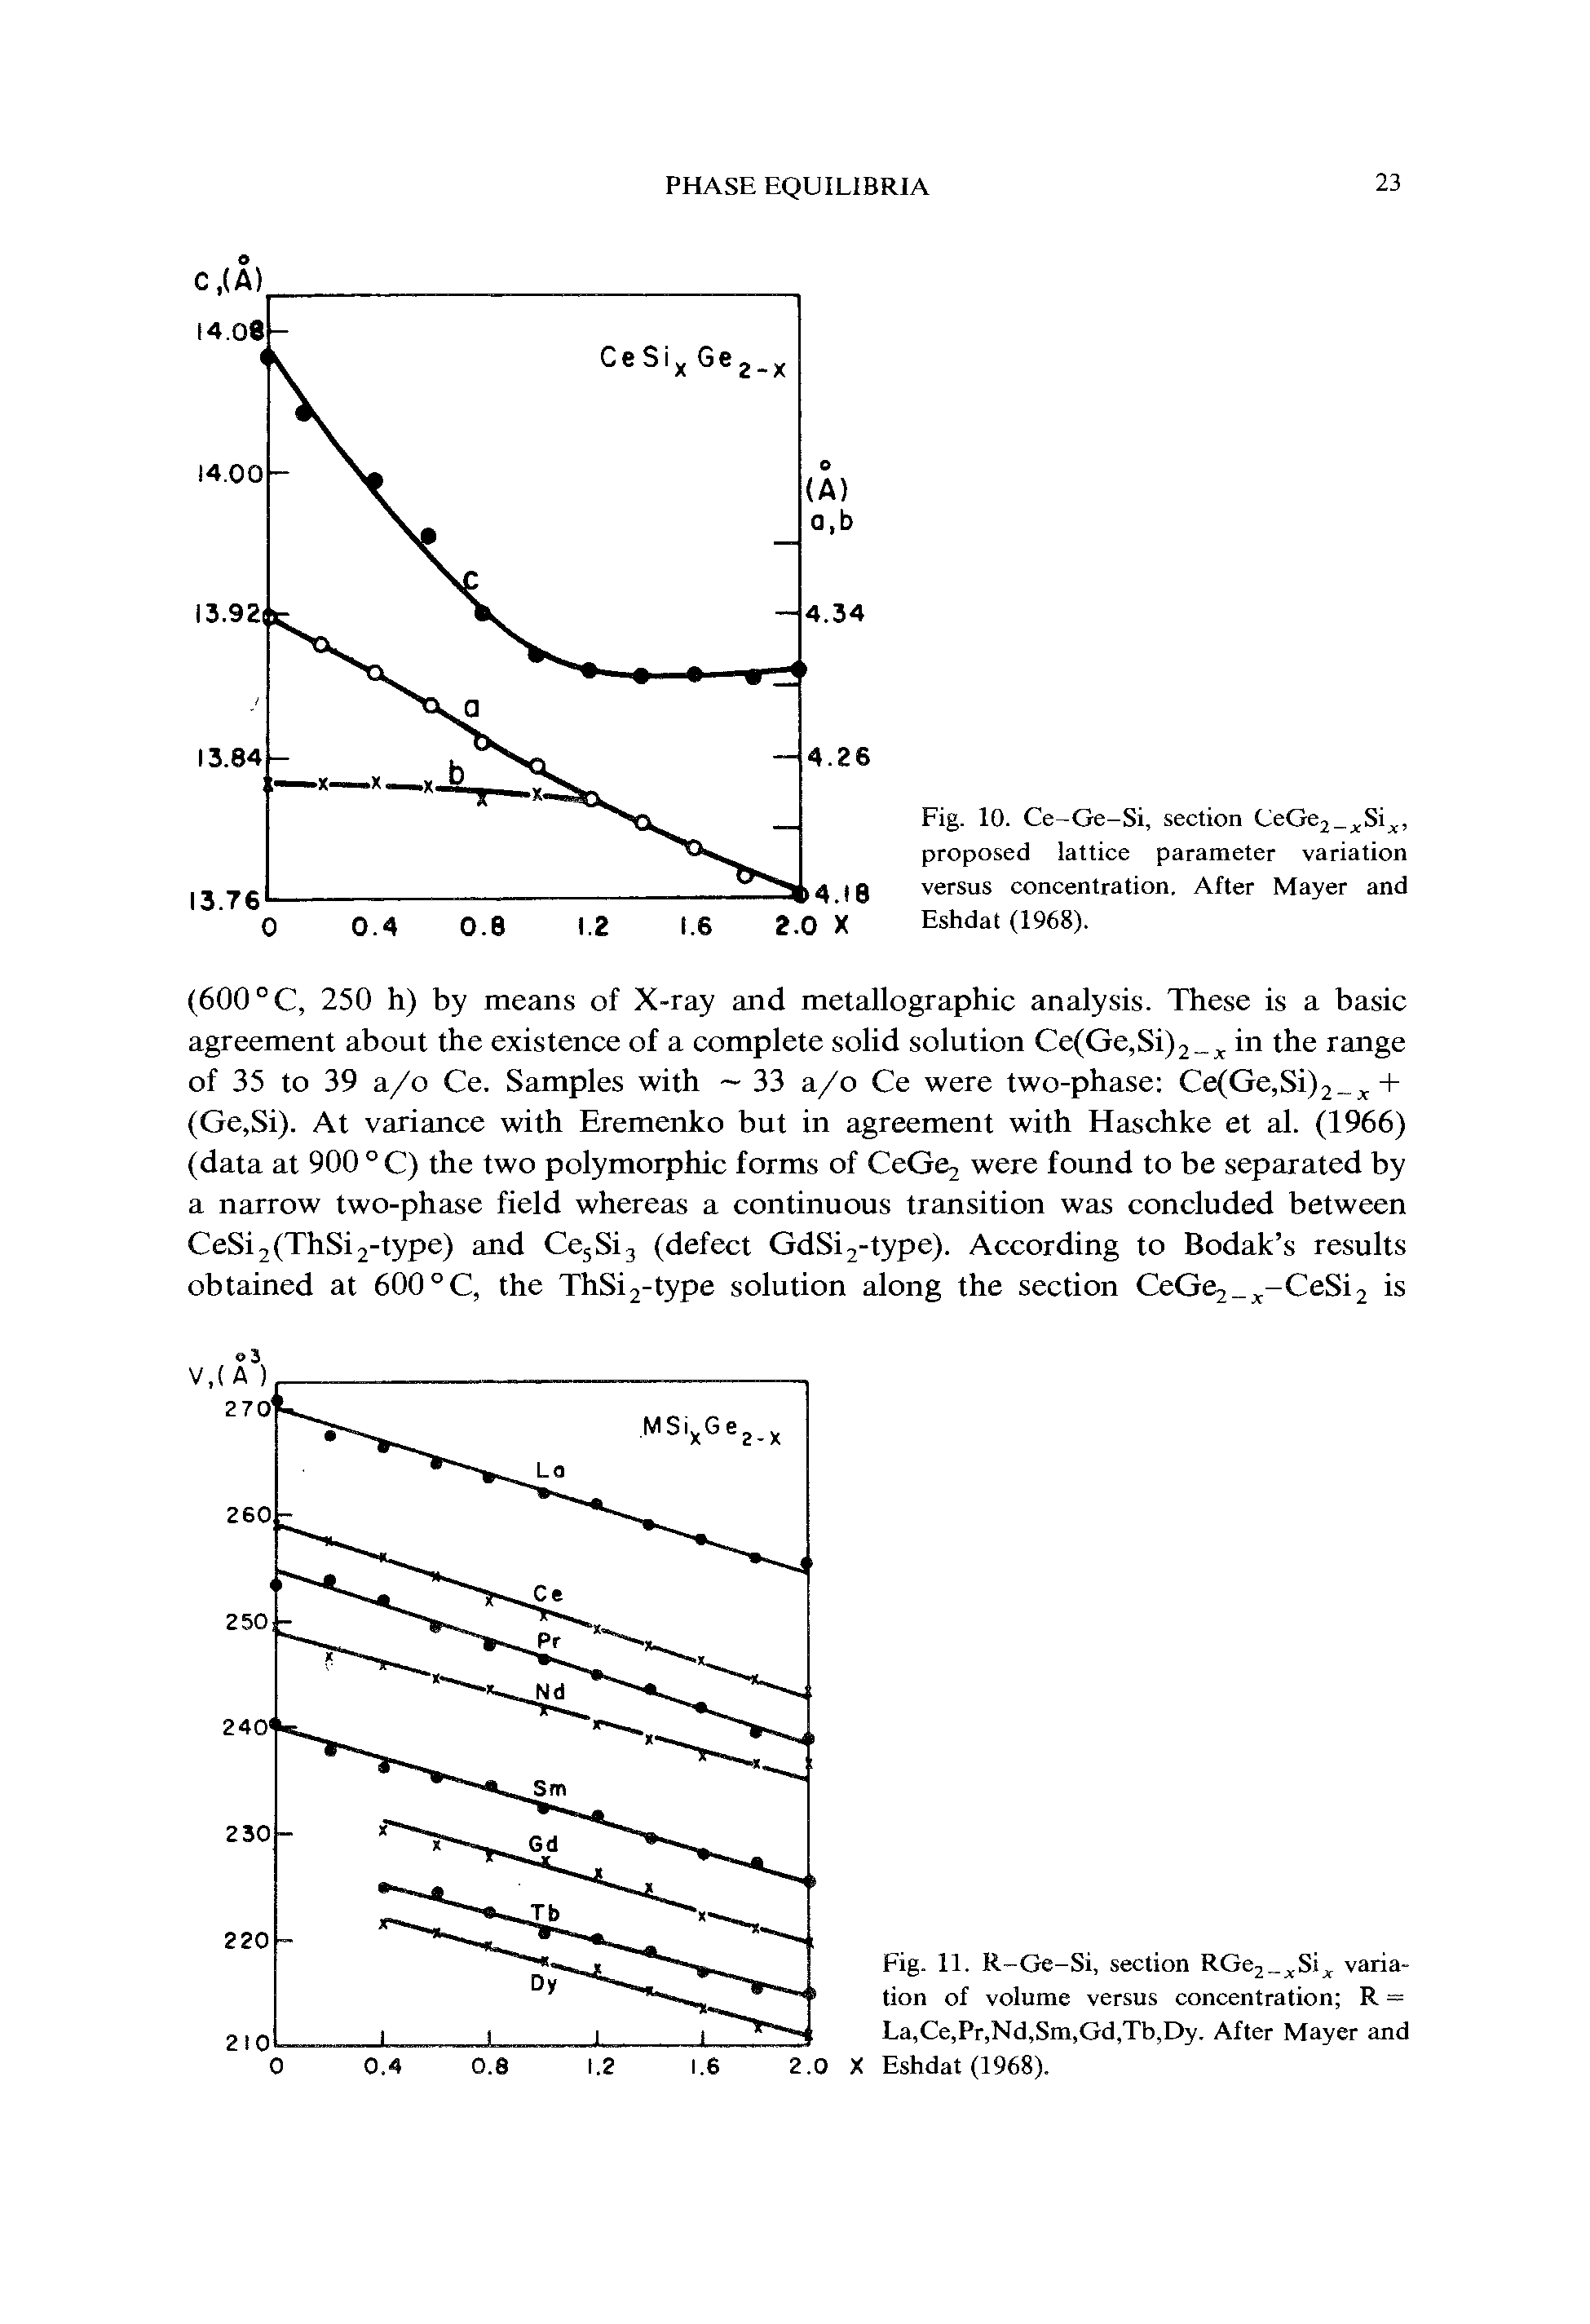 Fig. 10. Ce-Ge-Si, section CeGej Si, proposed lattice parameter variation versus concentration. After Mayer and Eshdat (1968).